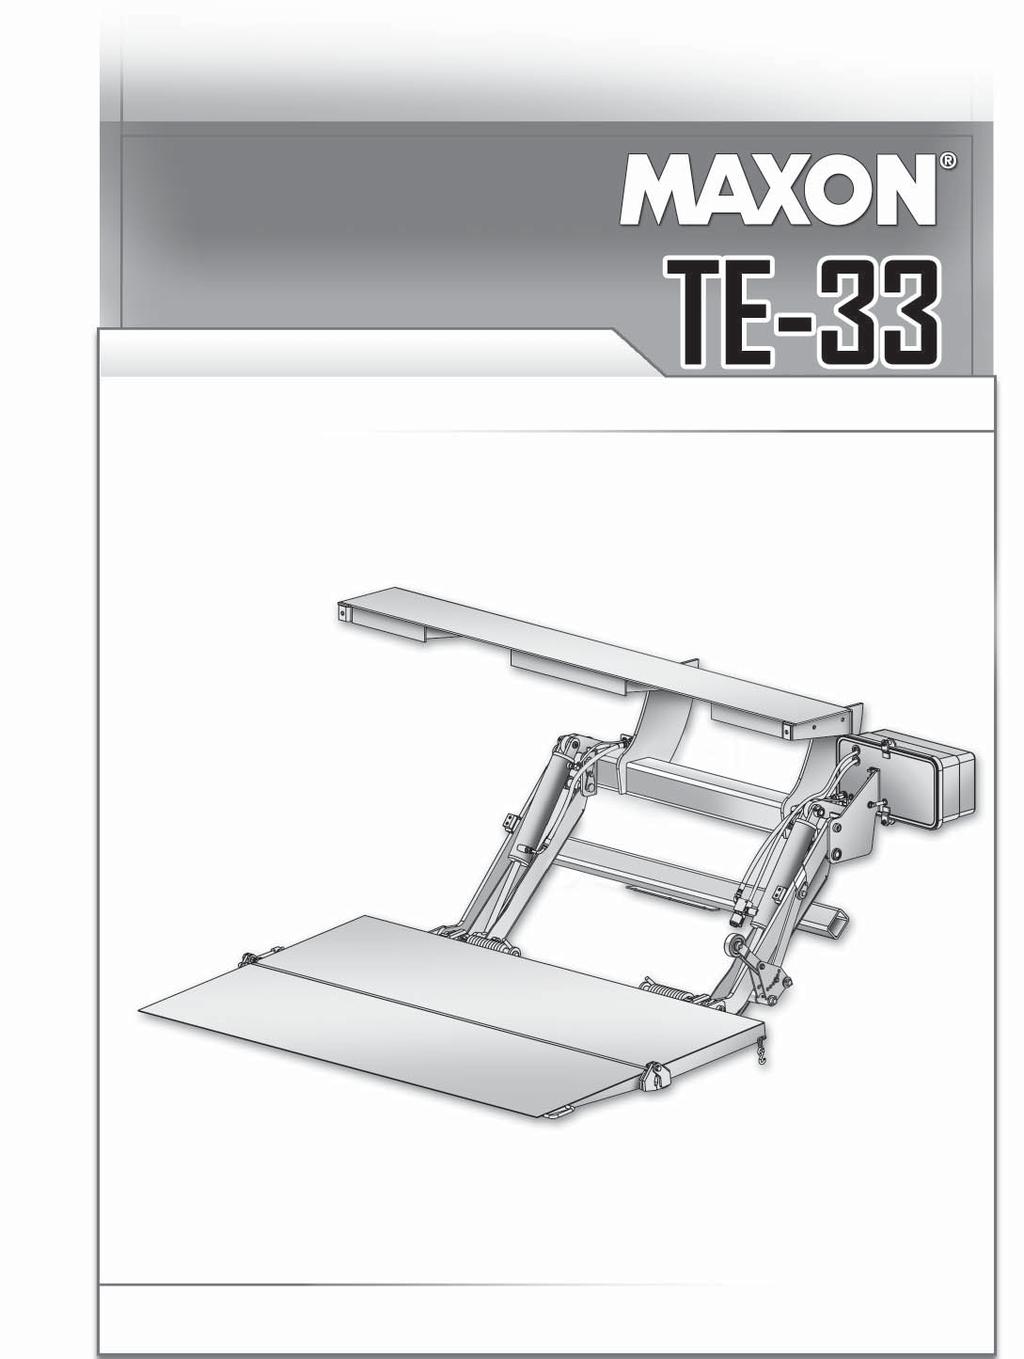 M-11-06 REV. K DECEMBER 2016 INSTALLATION MANUAL TE-33, TE-33L & TEWR-33 To fi nd maintenance information for your TE-33 Liftgate, go to www.maxonlift.com.